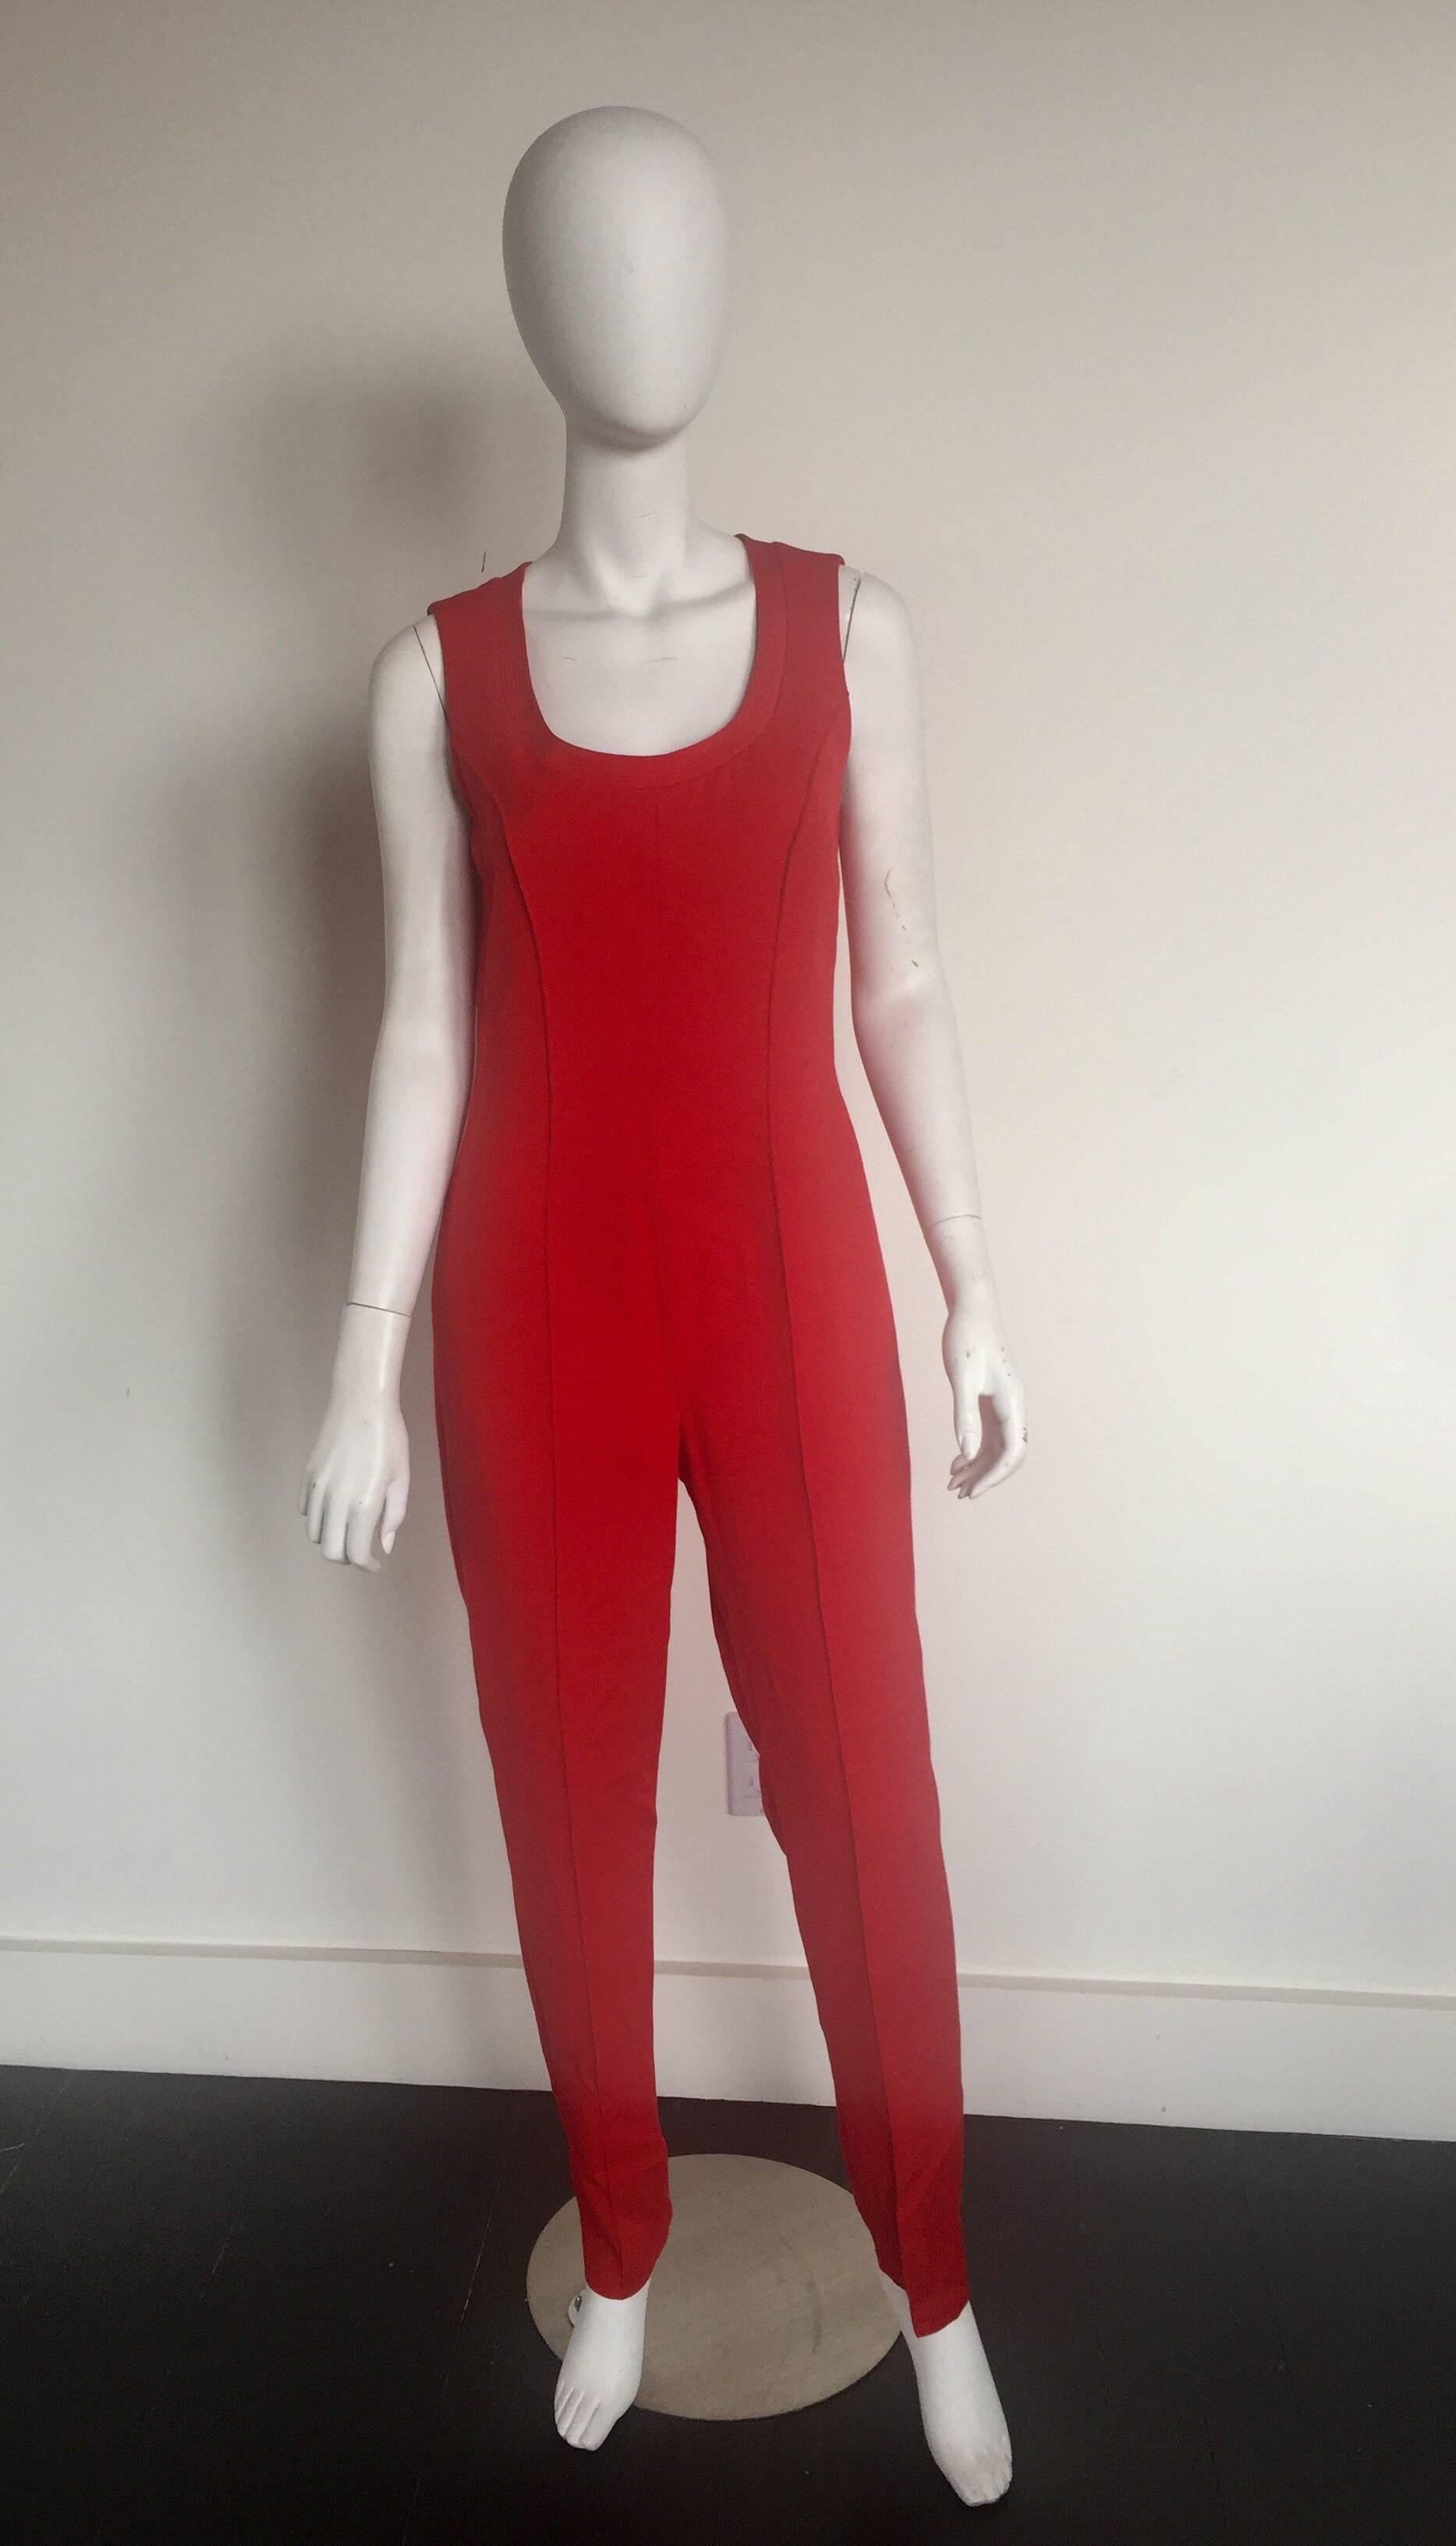 This iconic Gianni Versace Jumpsuit is a size X with a matching cropped bolero jacket.  It is missing a size label but most closely fits as US 8.  Please check measurments